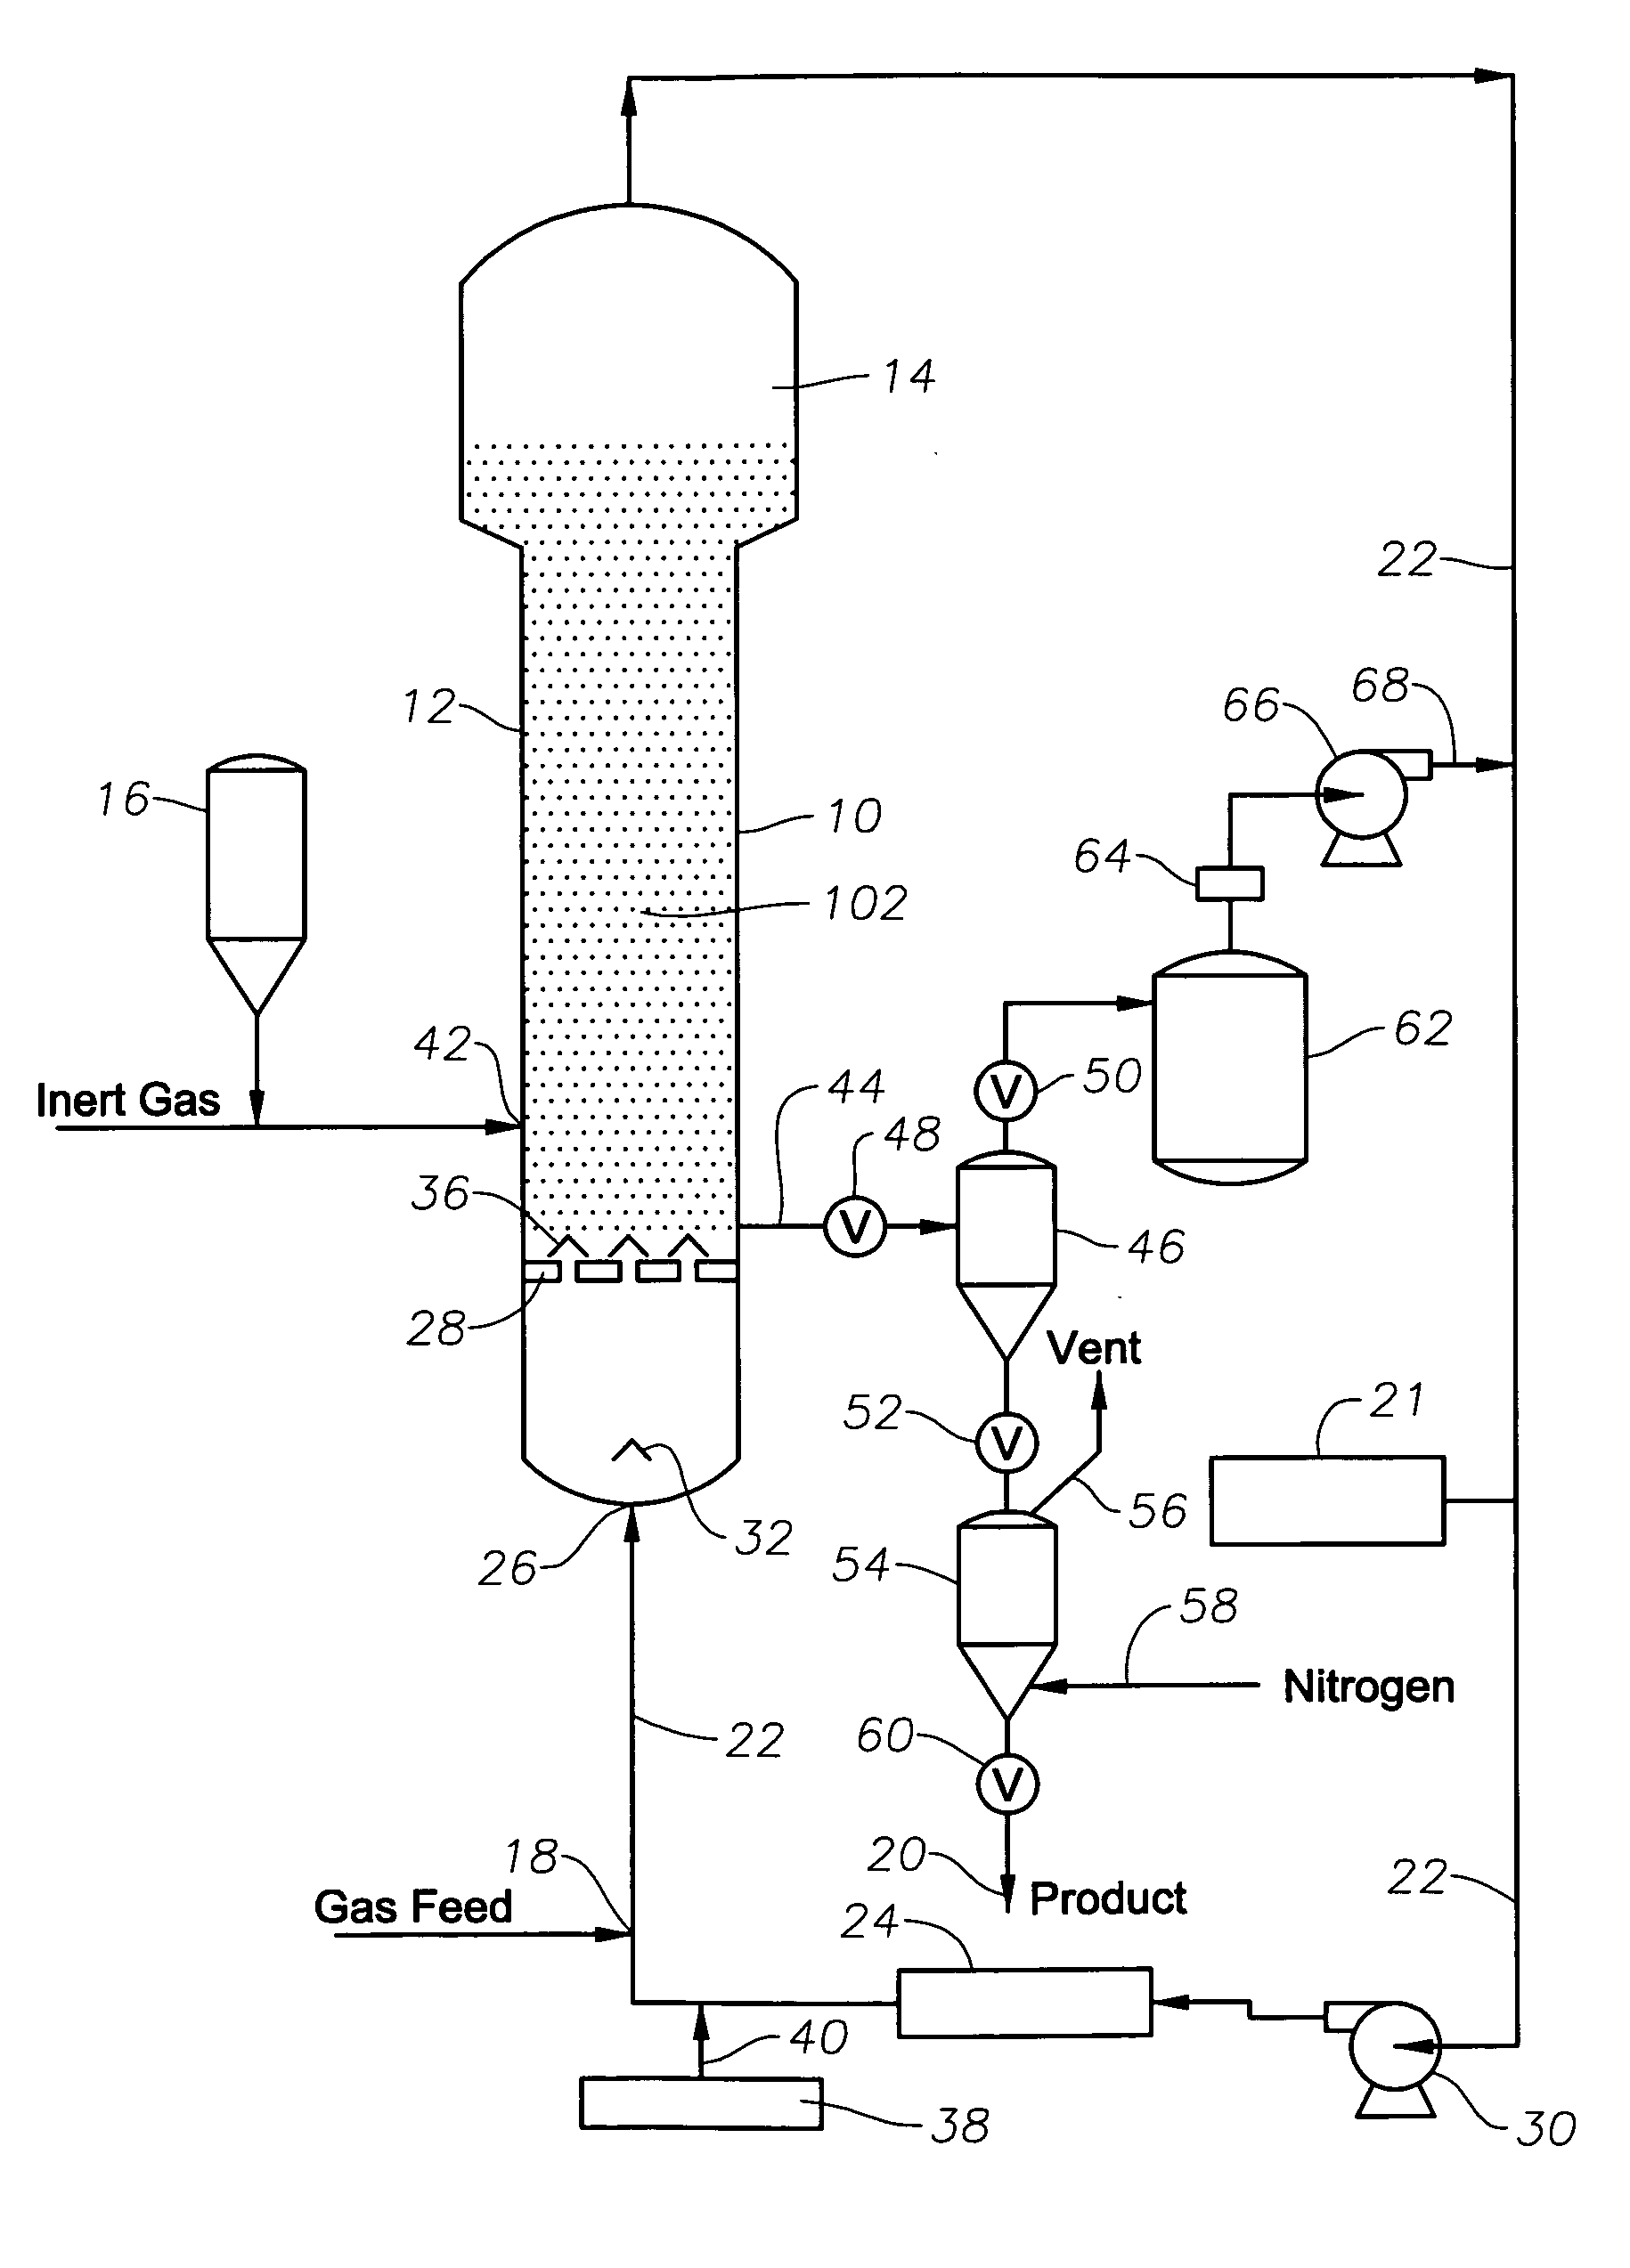 Gas-phase process